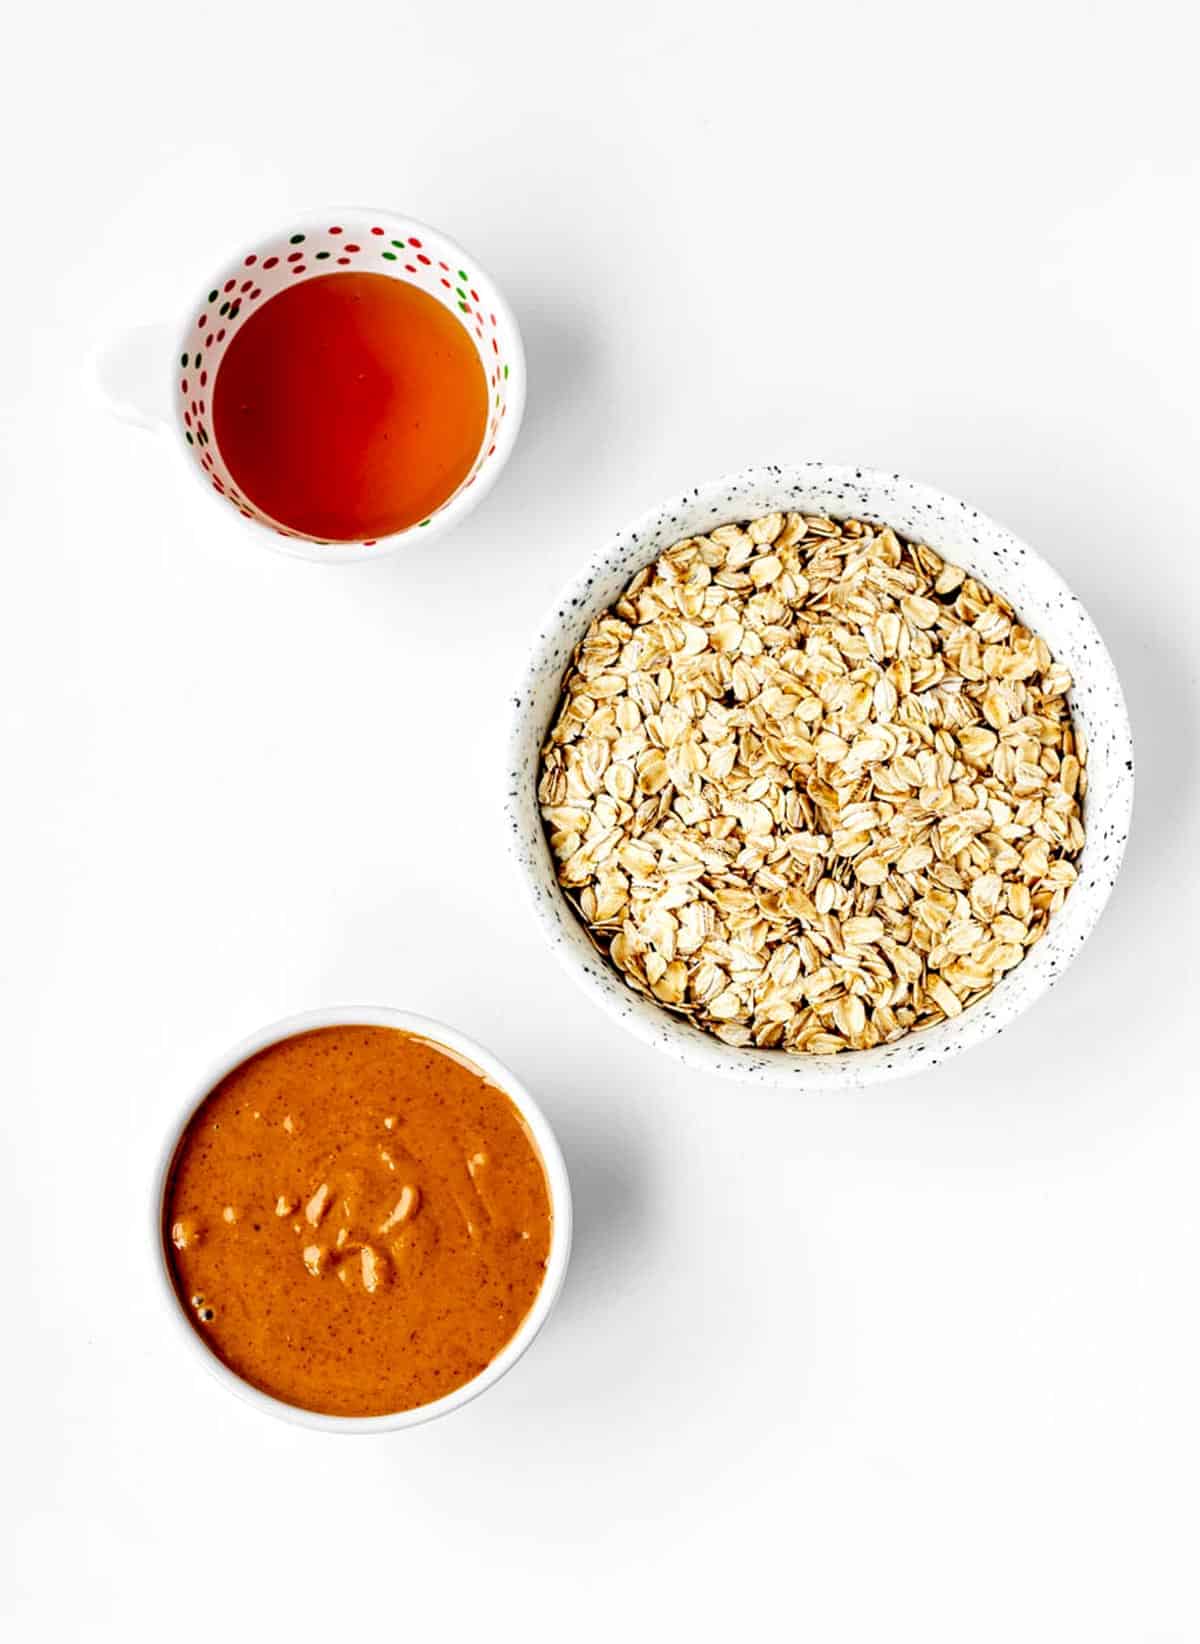 Oats, peanut butter, and maple syrup for the 3-ingredient peanut butter oatmeal balls recipe.